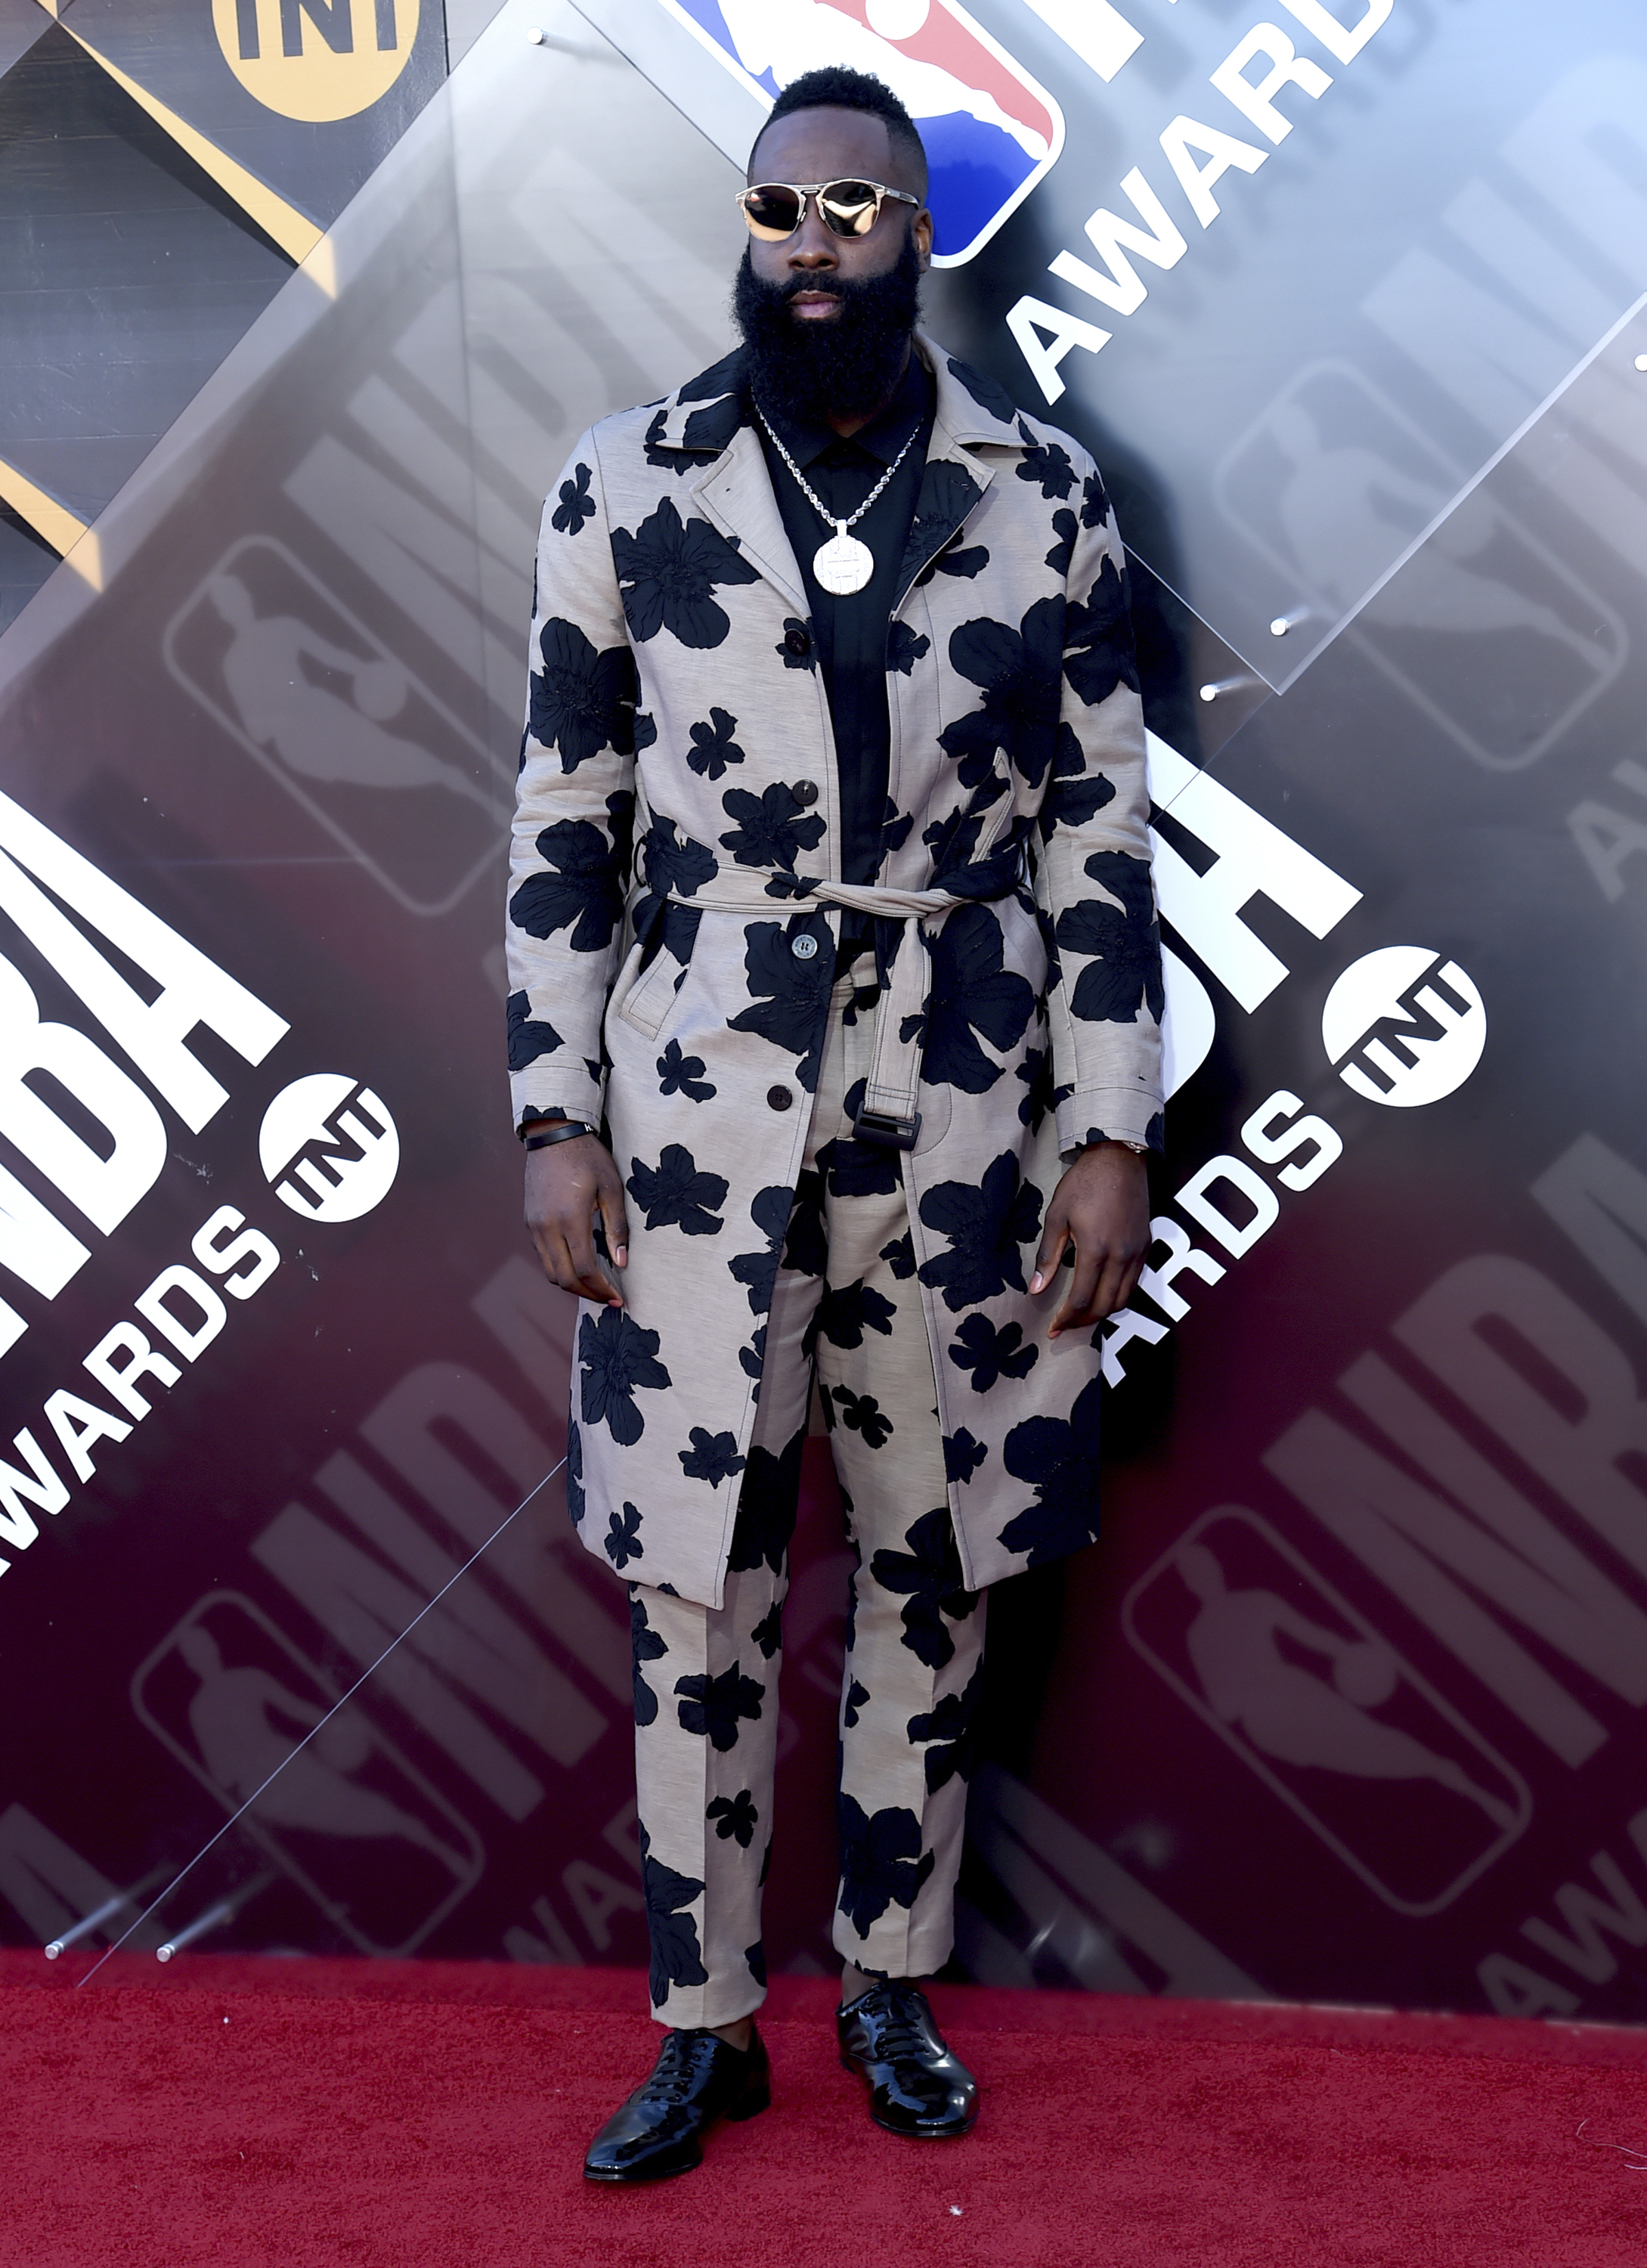 Twitter users agreed that James Harden's outfit resembled a